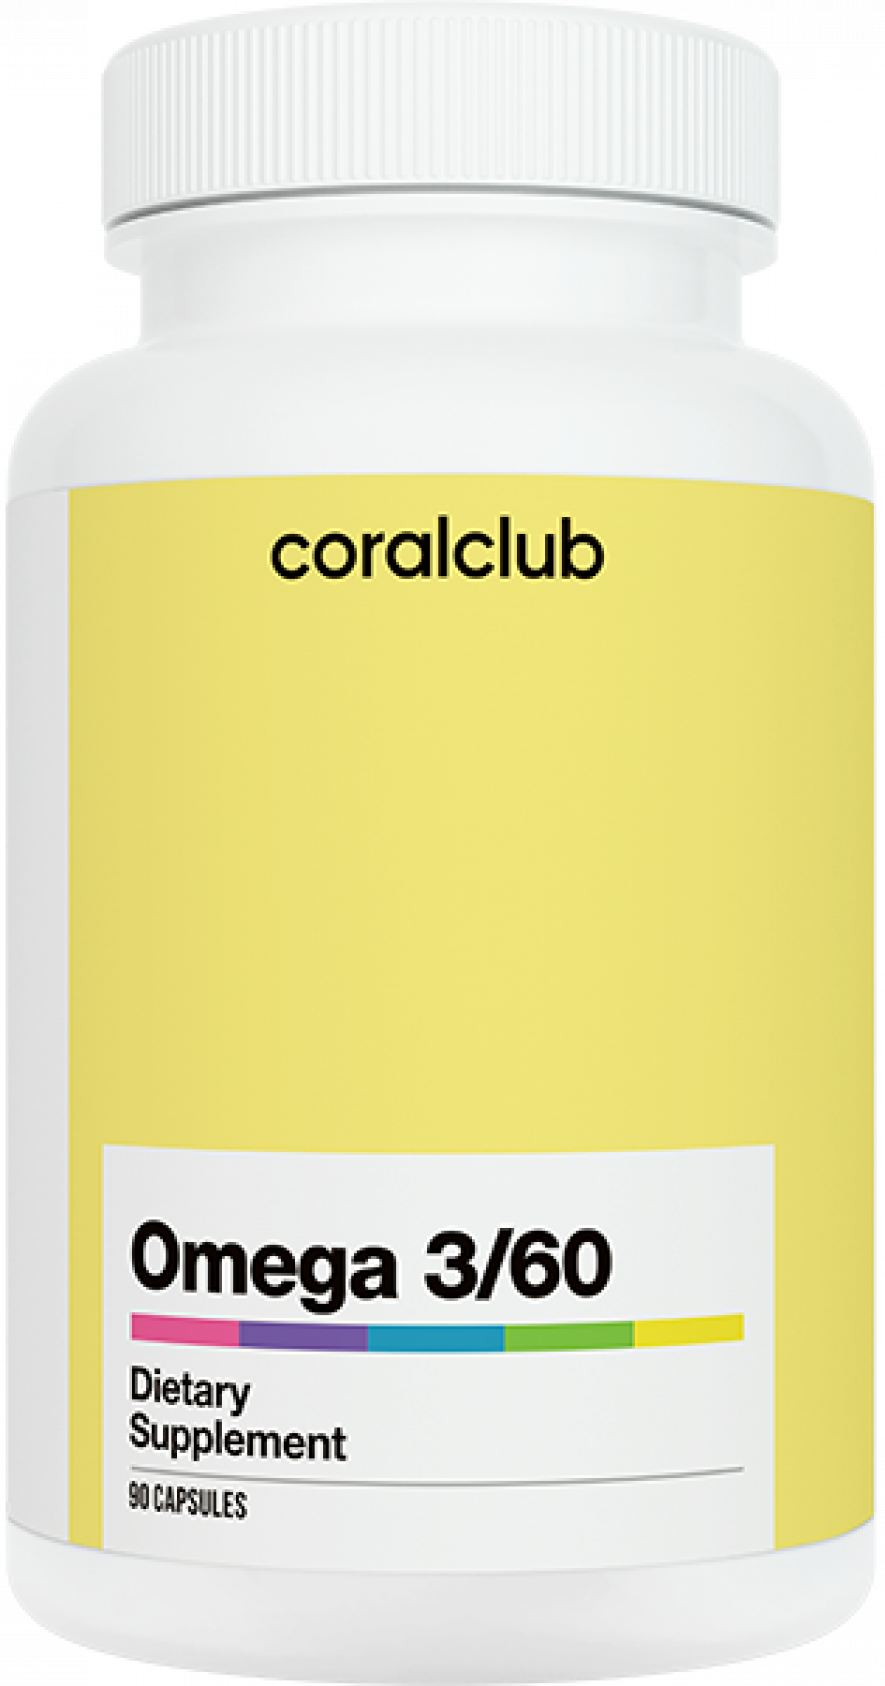 Omega 3/60 from Coral Club: it got more than you know